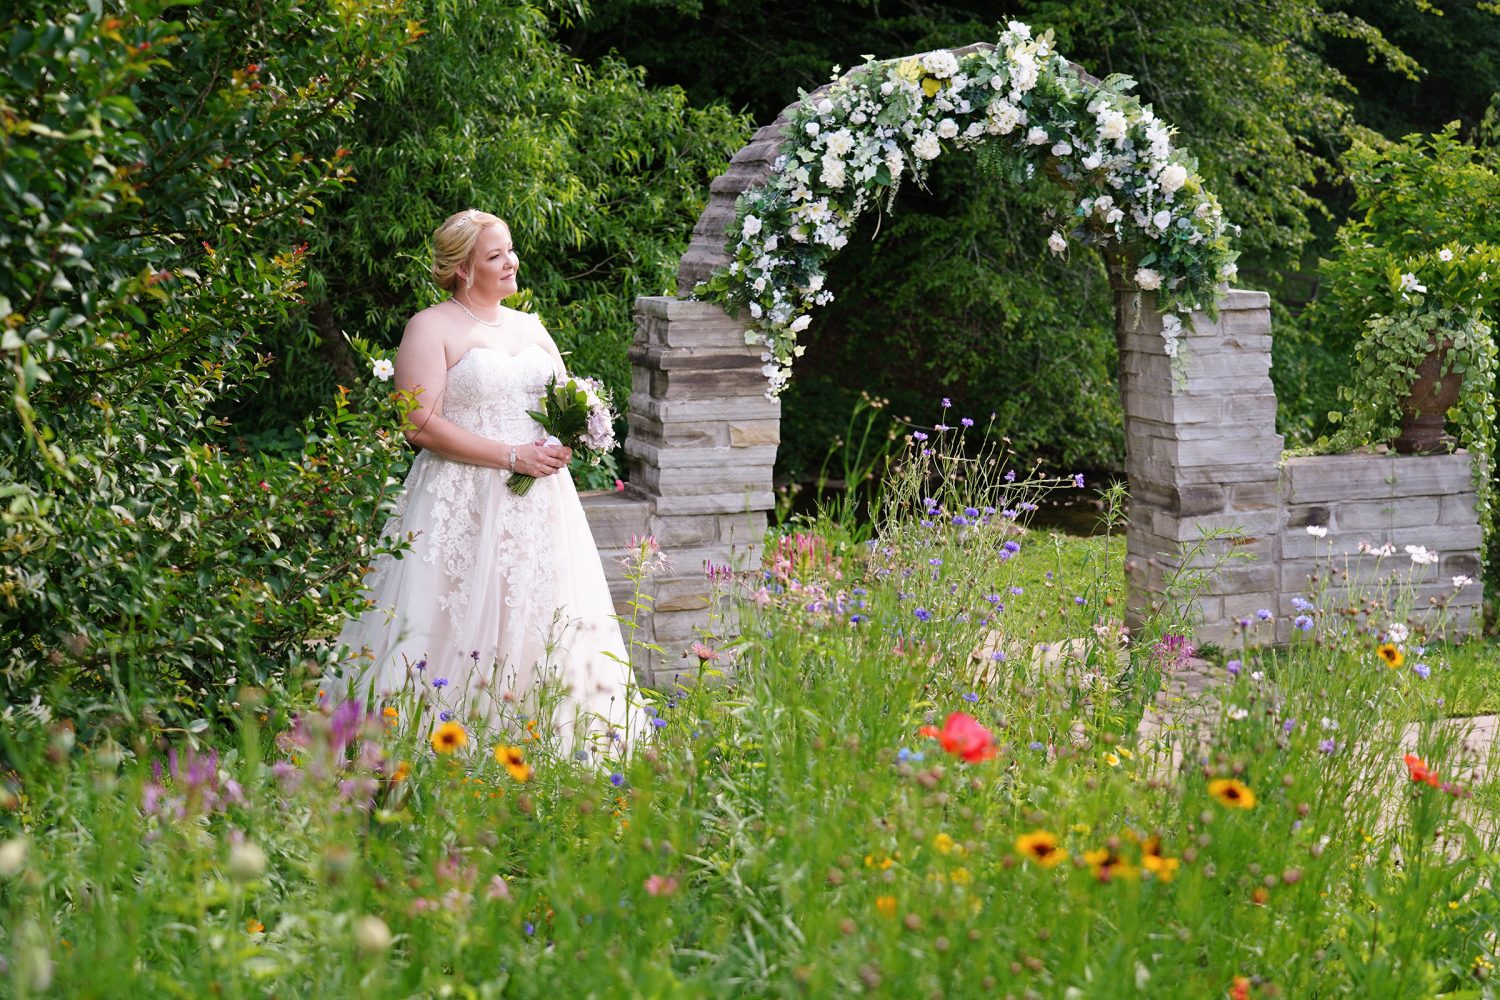 Bride by a stone wedding arch decorated with white flowers in a spring wildflower garden